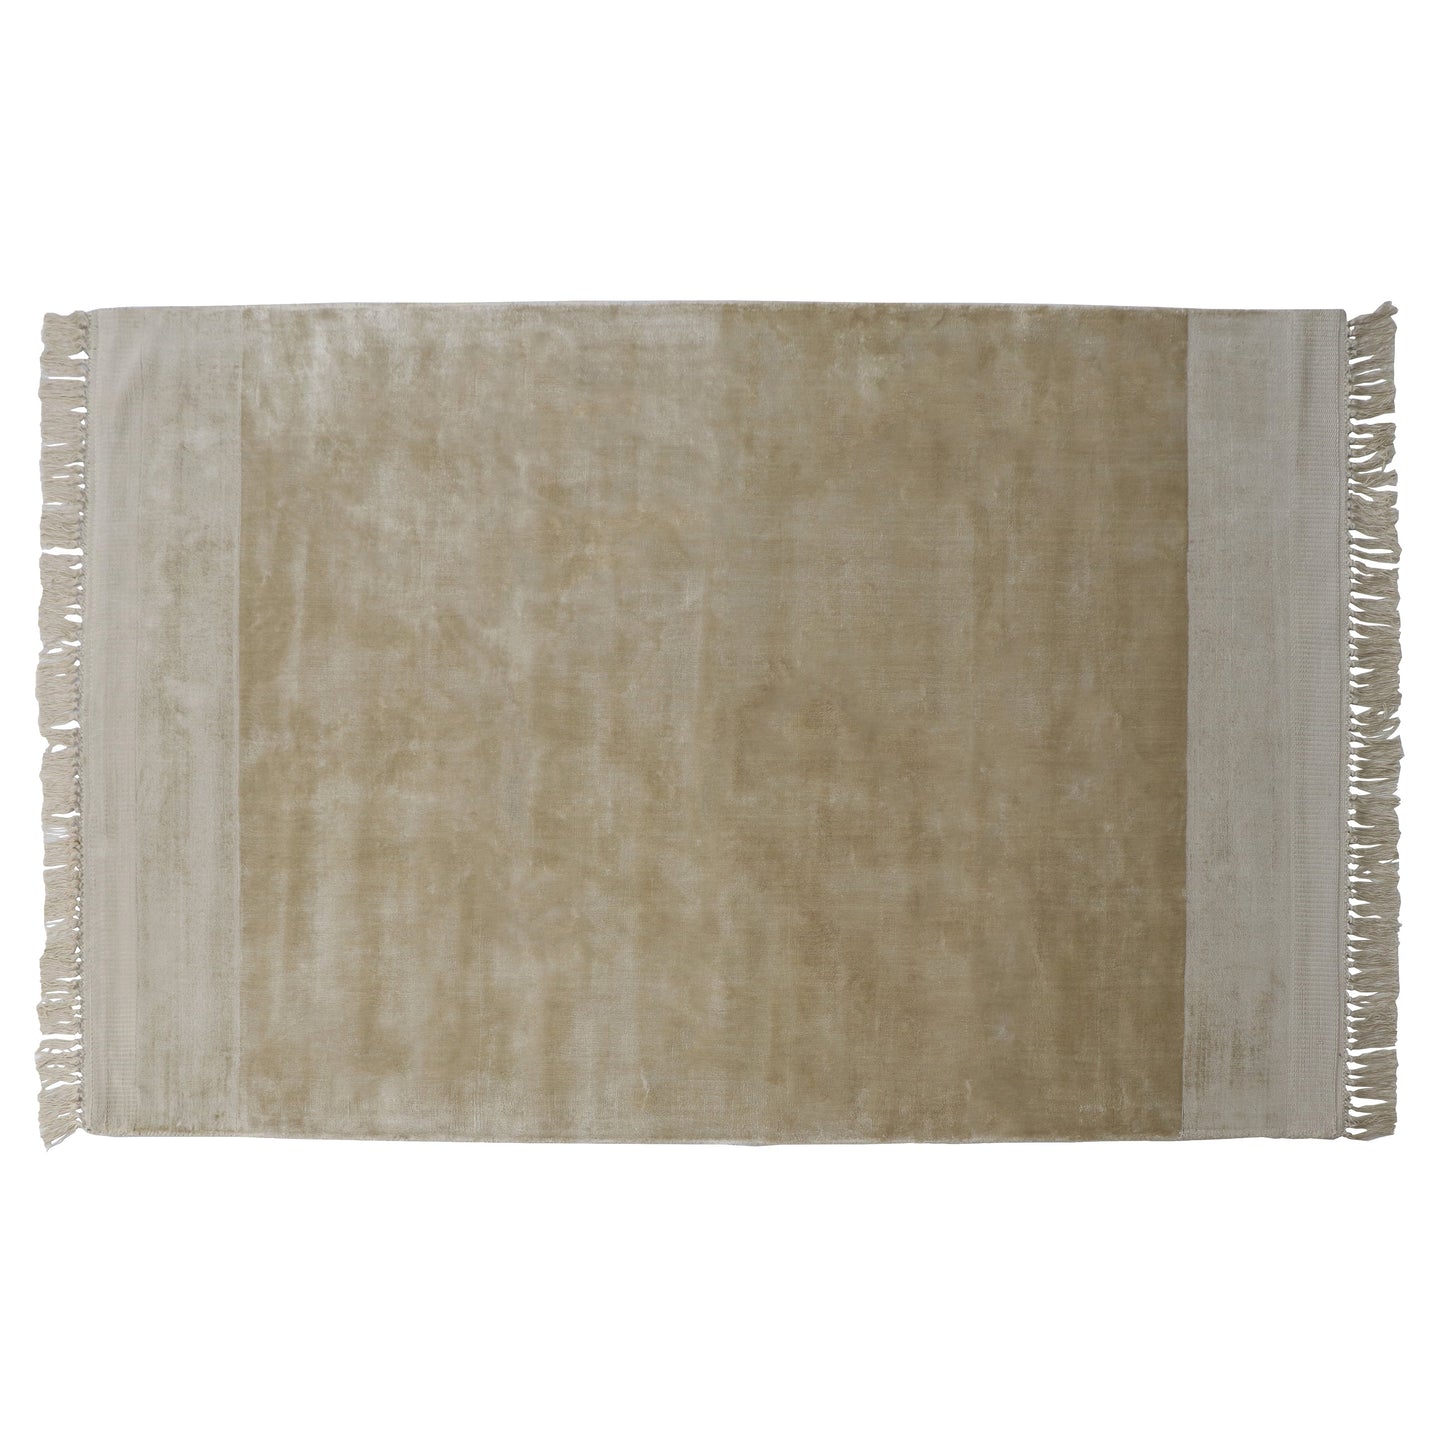 BEPUREHOME | Sweep - Teppich, Milch 200x300cm